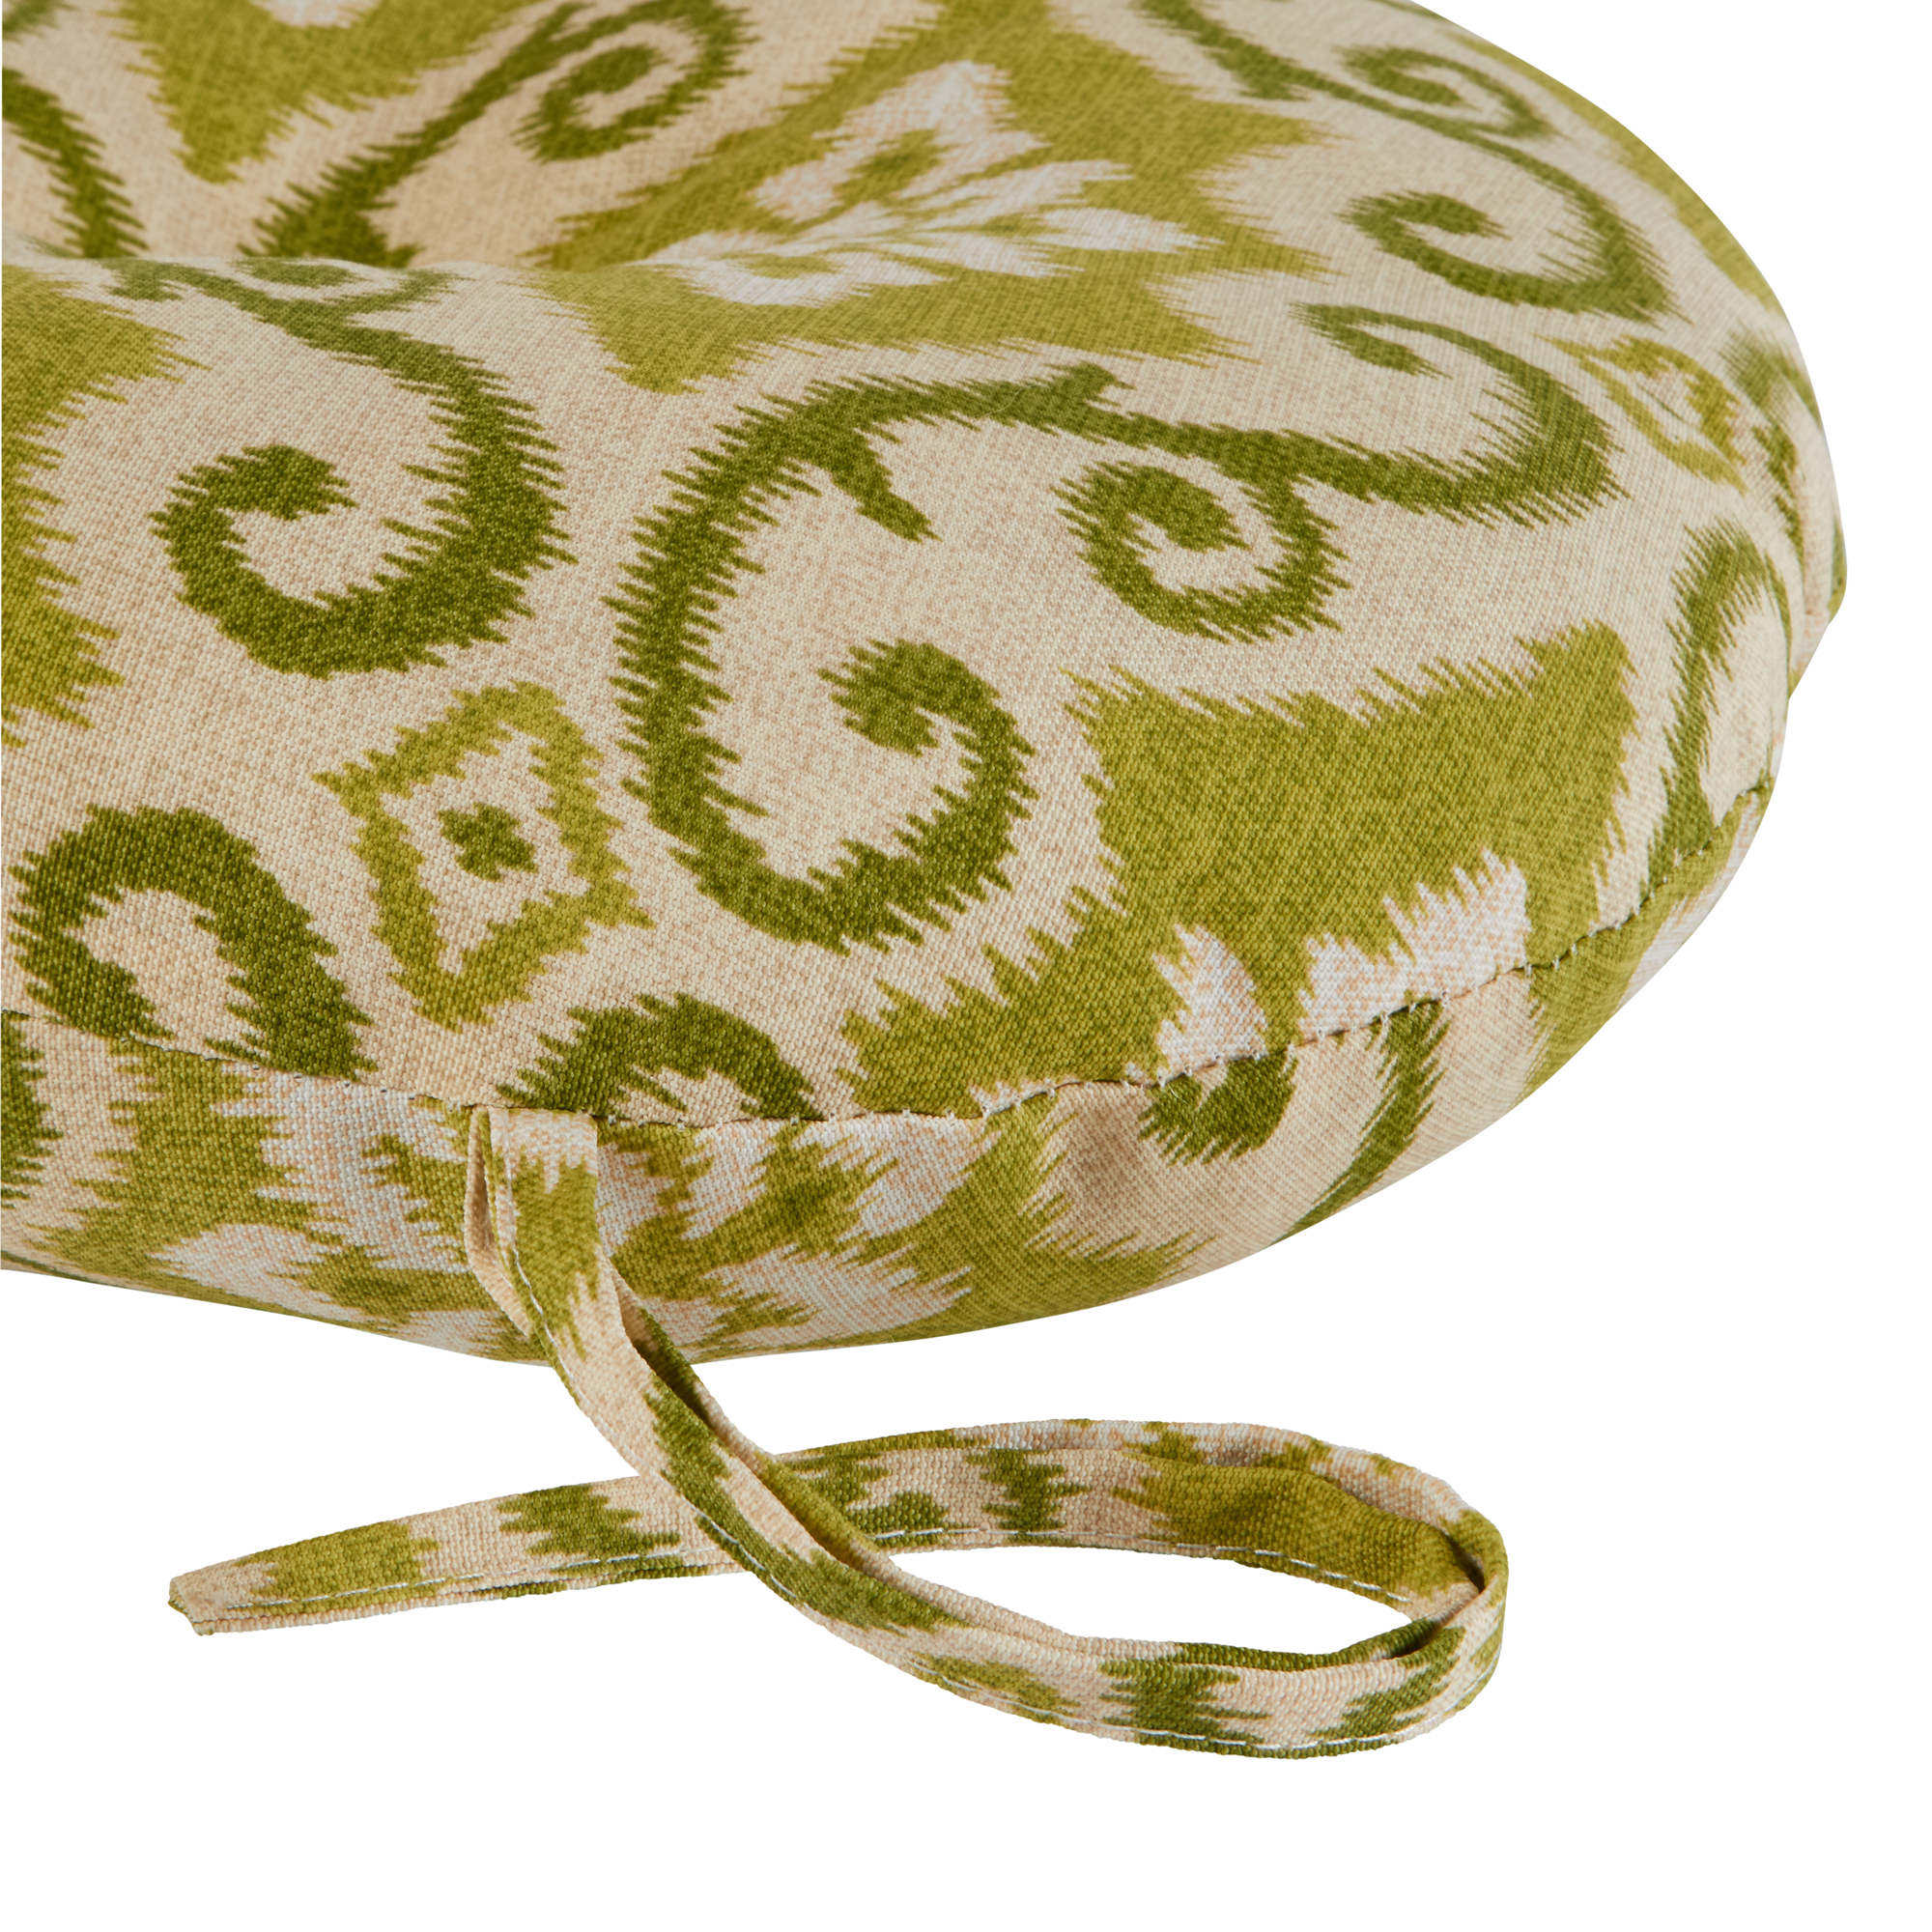 Greendale Home Fashions Shoreham Green Ikat 15 in. Round Outdoor Reversible Bistro Seat Cushion (Set of 2) - image 4 of 6